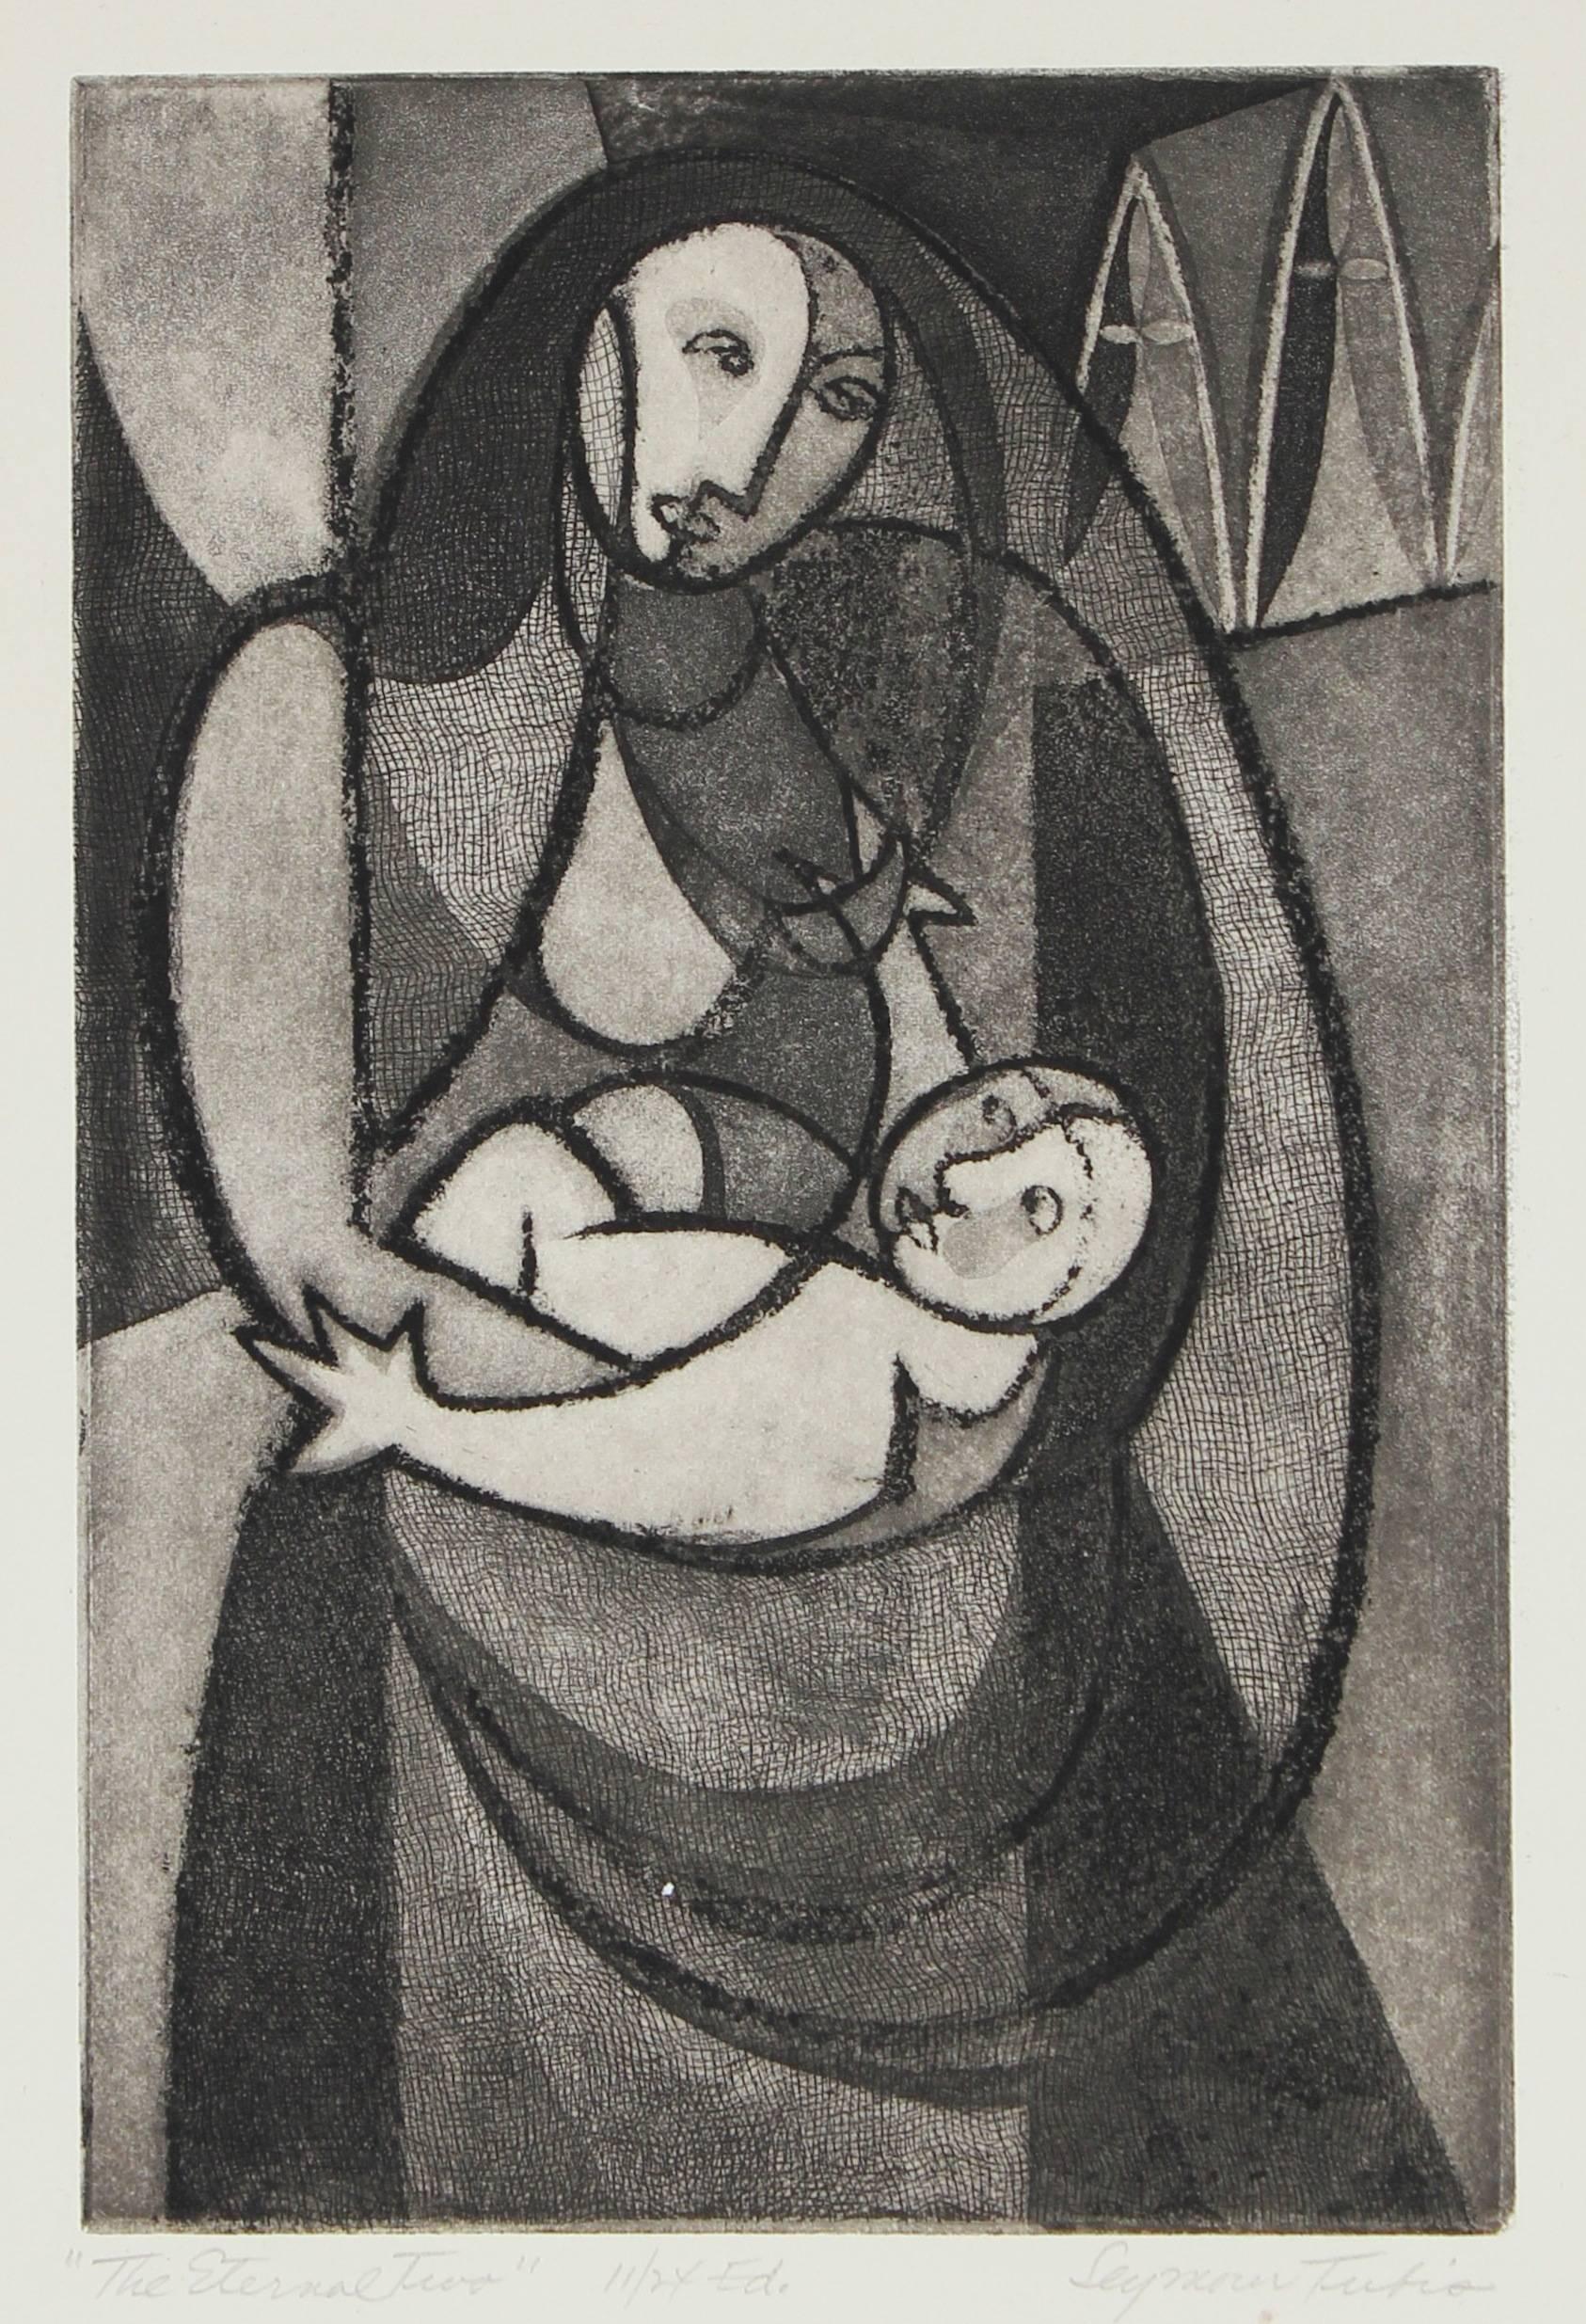 Seymour Tubis Figurative Print - "The Eternal Two" Madonna and Child, Etching on Paper, Late 1940s